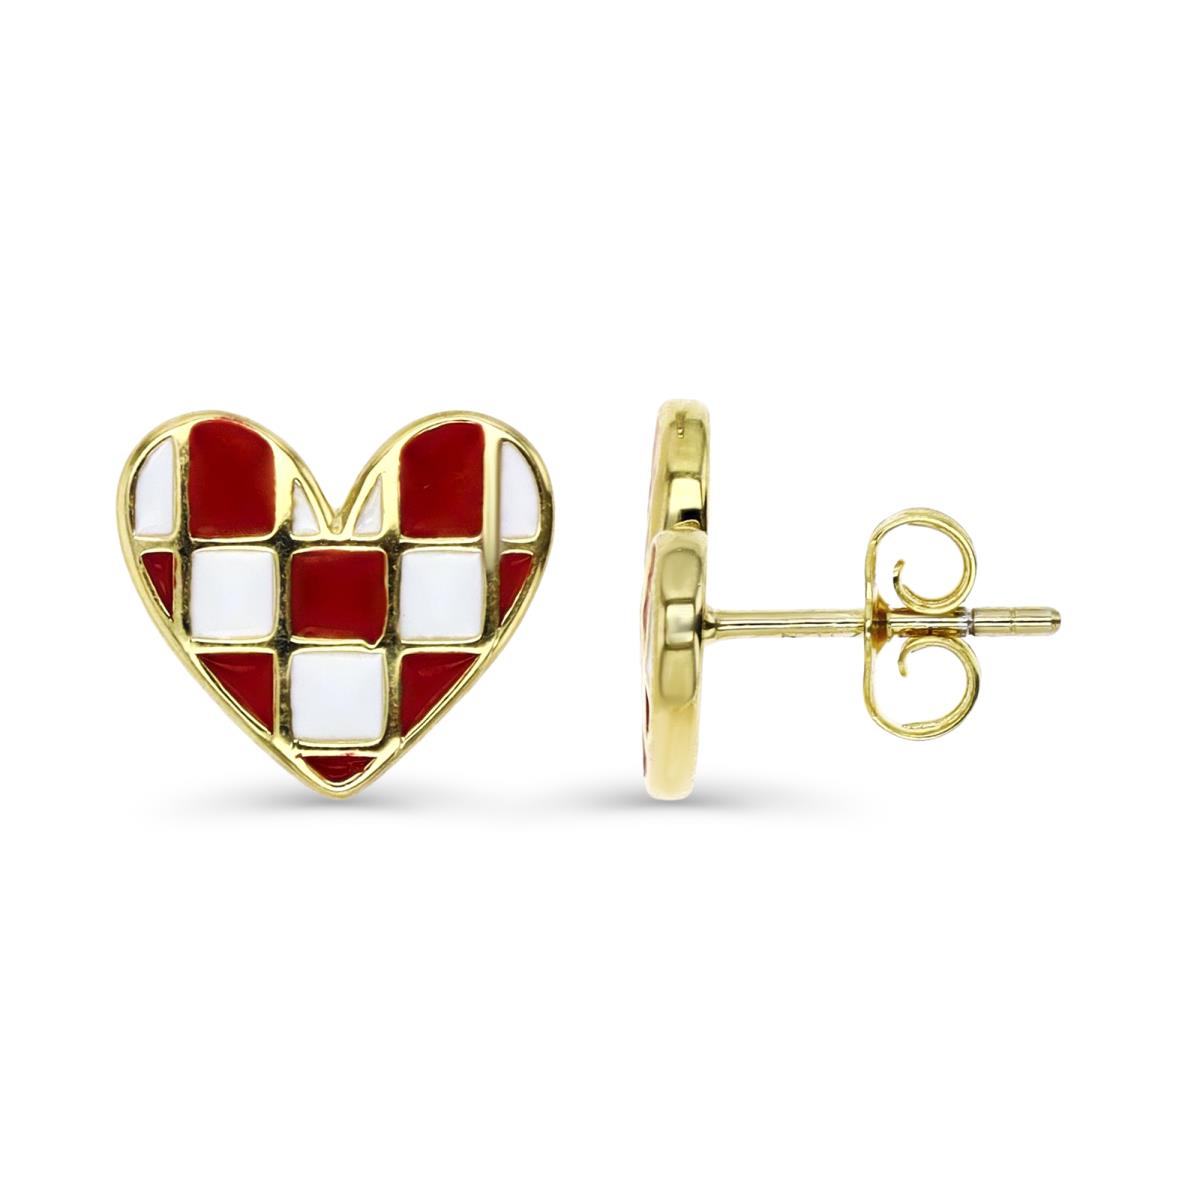 Sterling Silver Yellow 1M 12X11MM Polished Red & White Enamel Heart Stud Earring